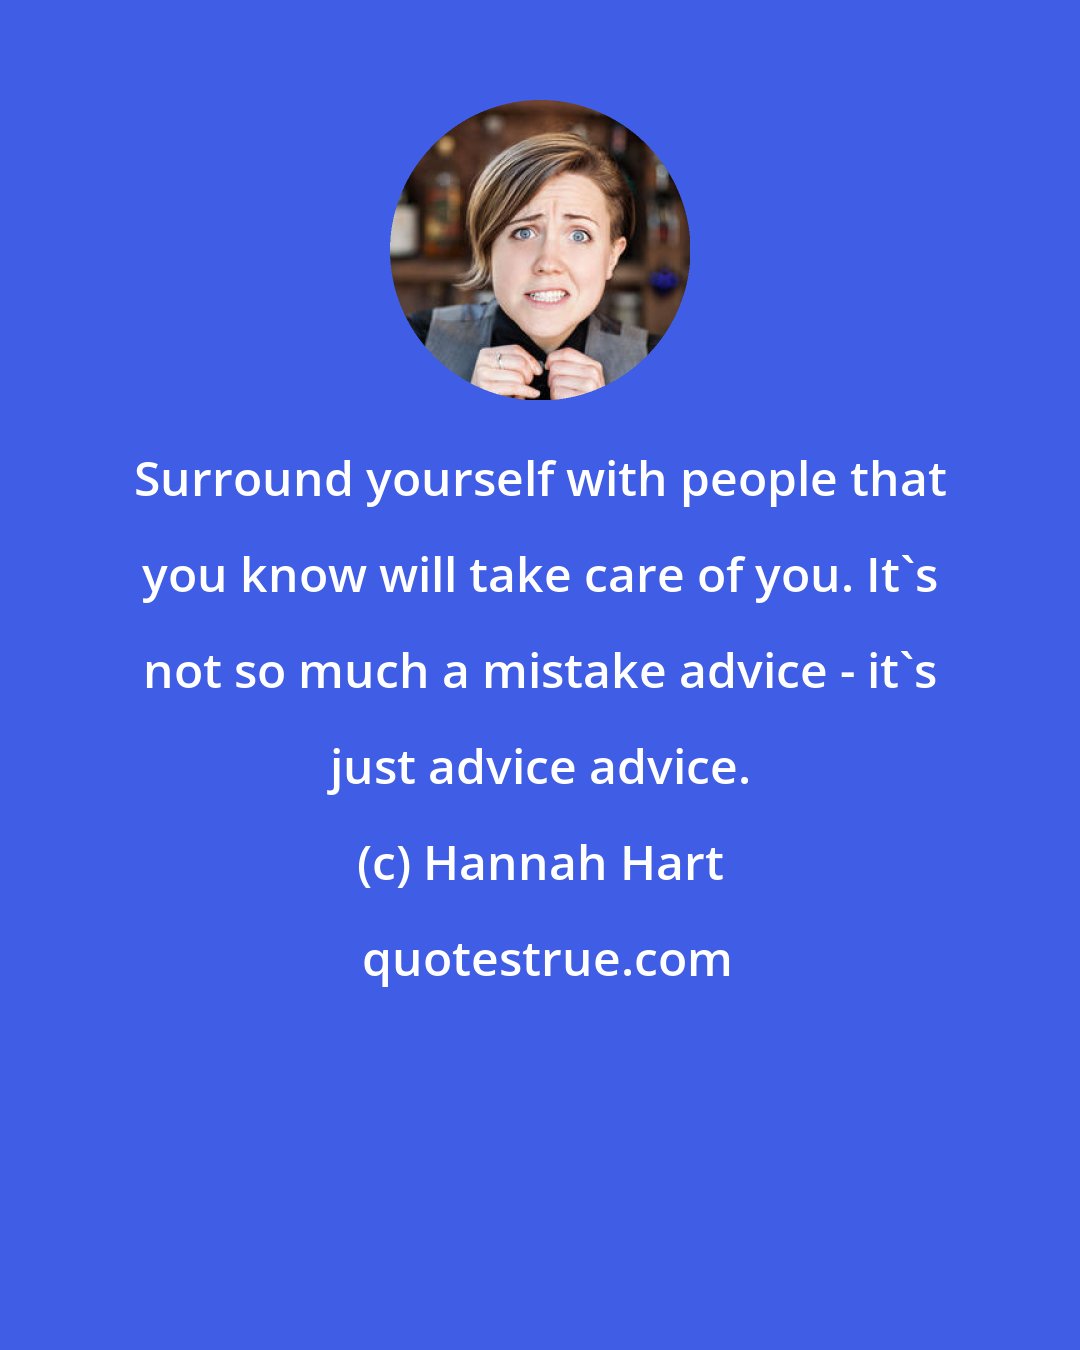 Hannah Hart: Surround yourself with people that you know will take care of you. It's not so much a mistake advice - it's just advice advice.